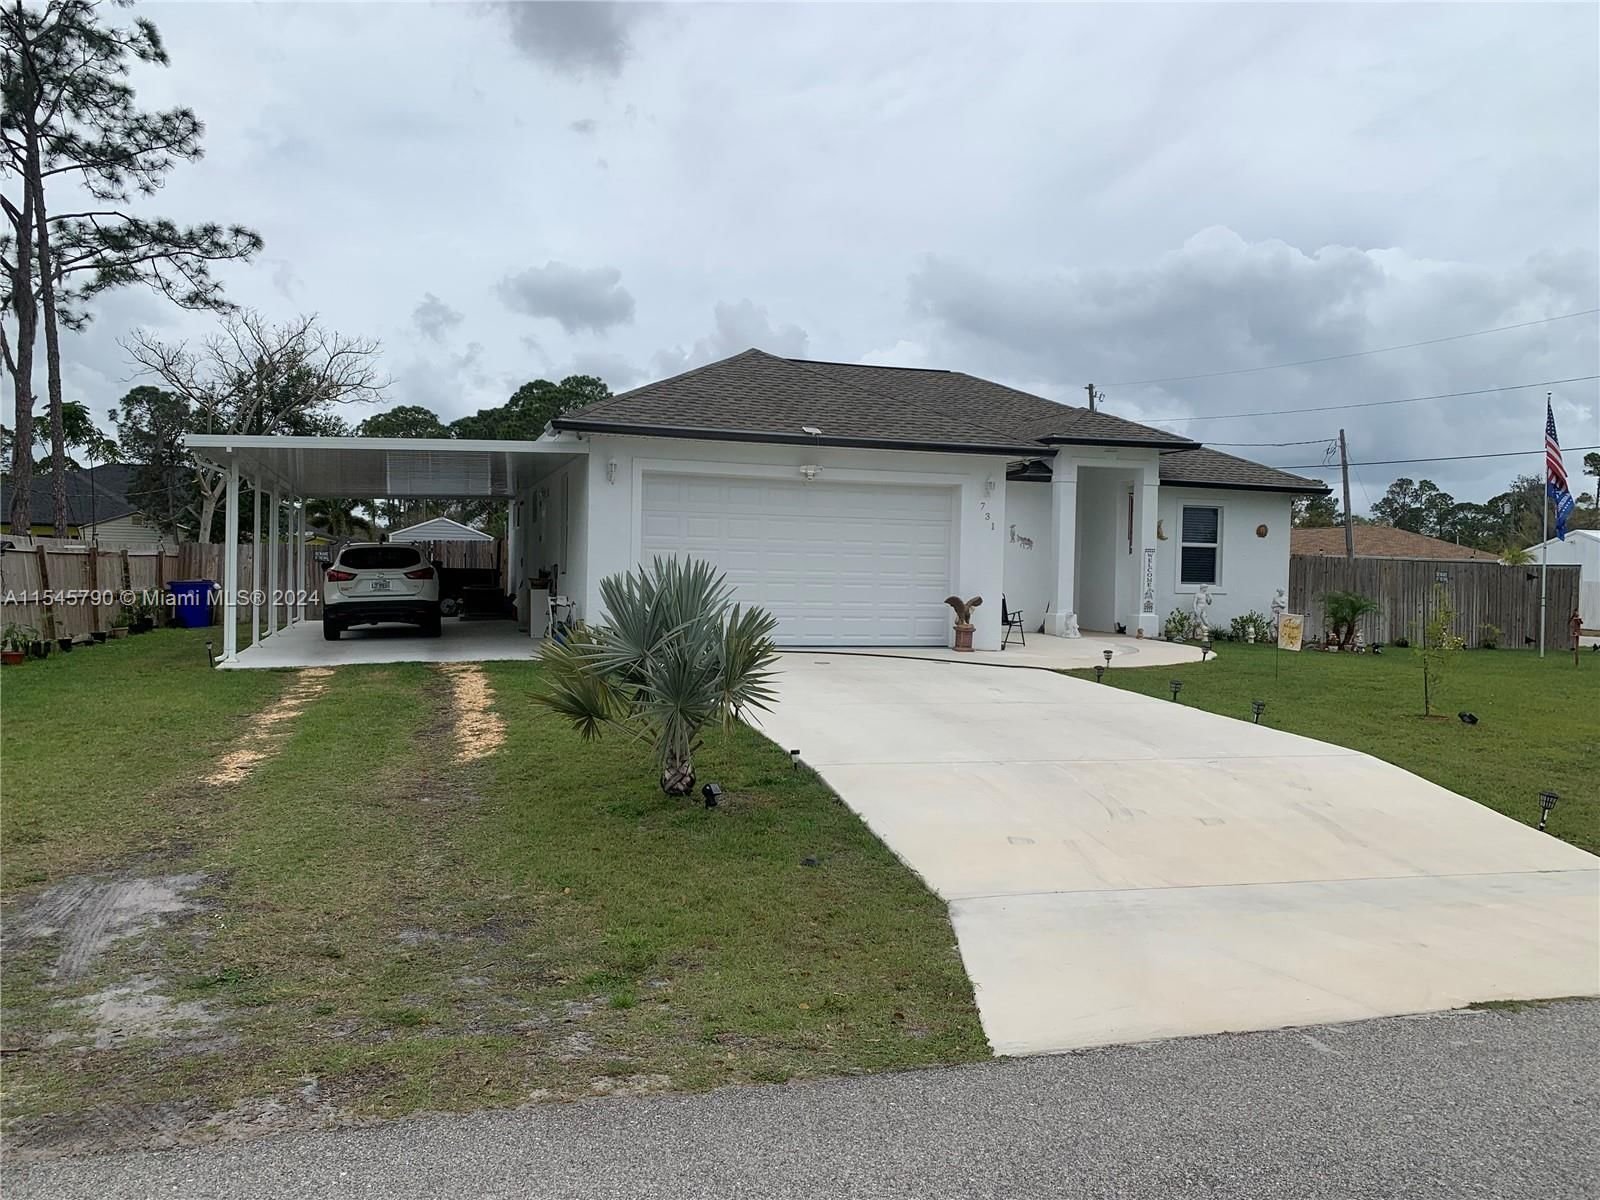 Real estate property located at 731 Triumph Dr, Highlands County, Sebring County, Sebring, FL